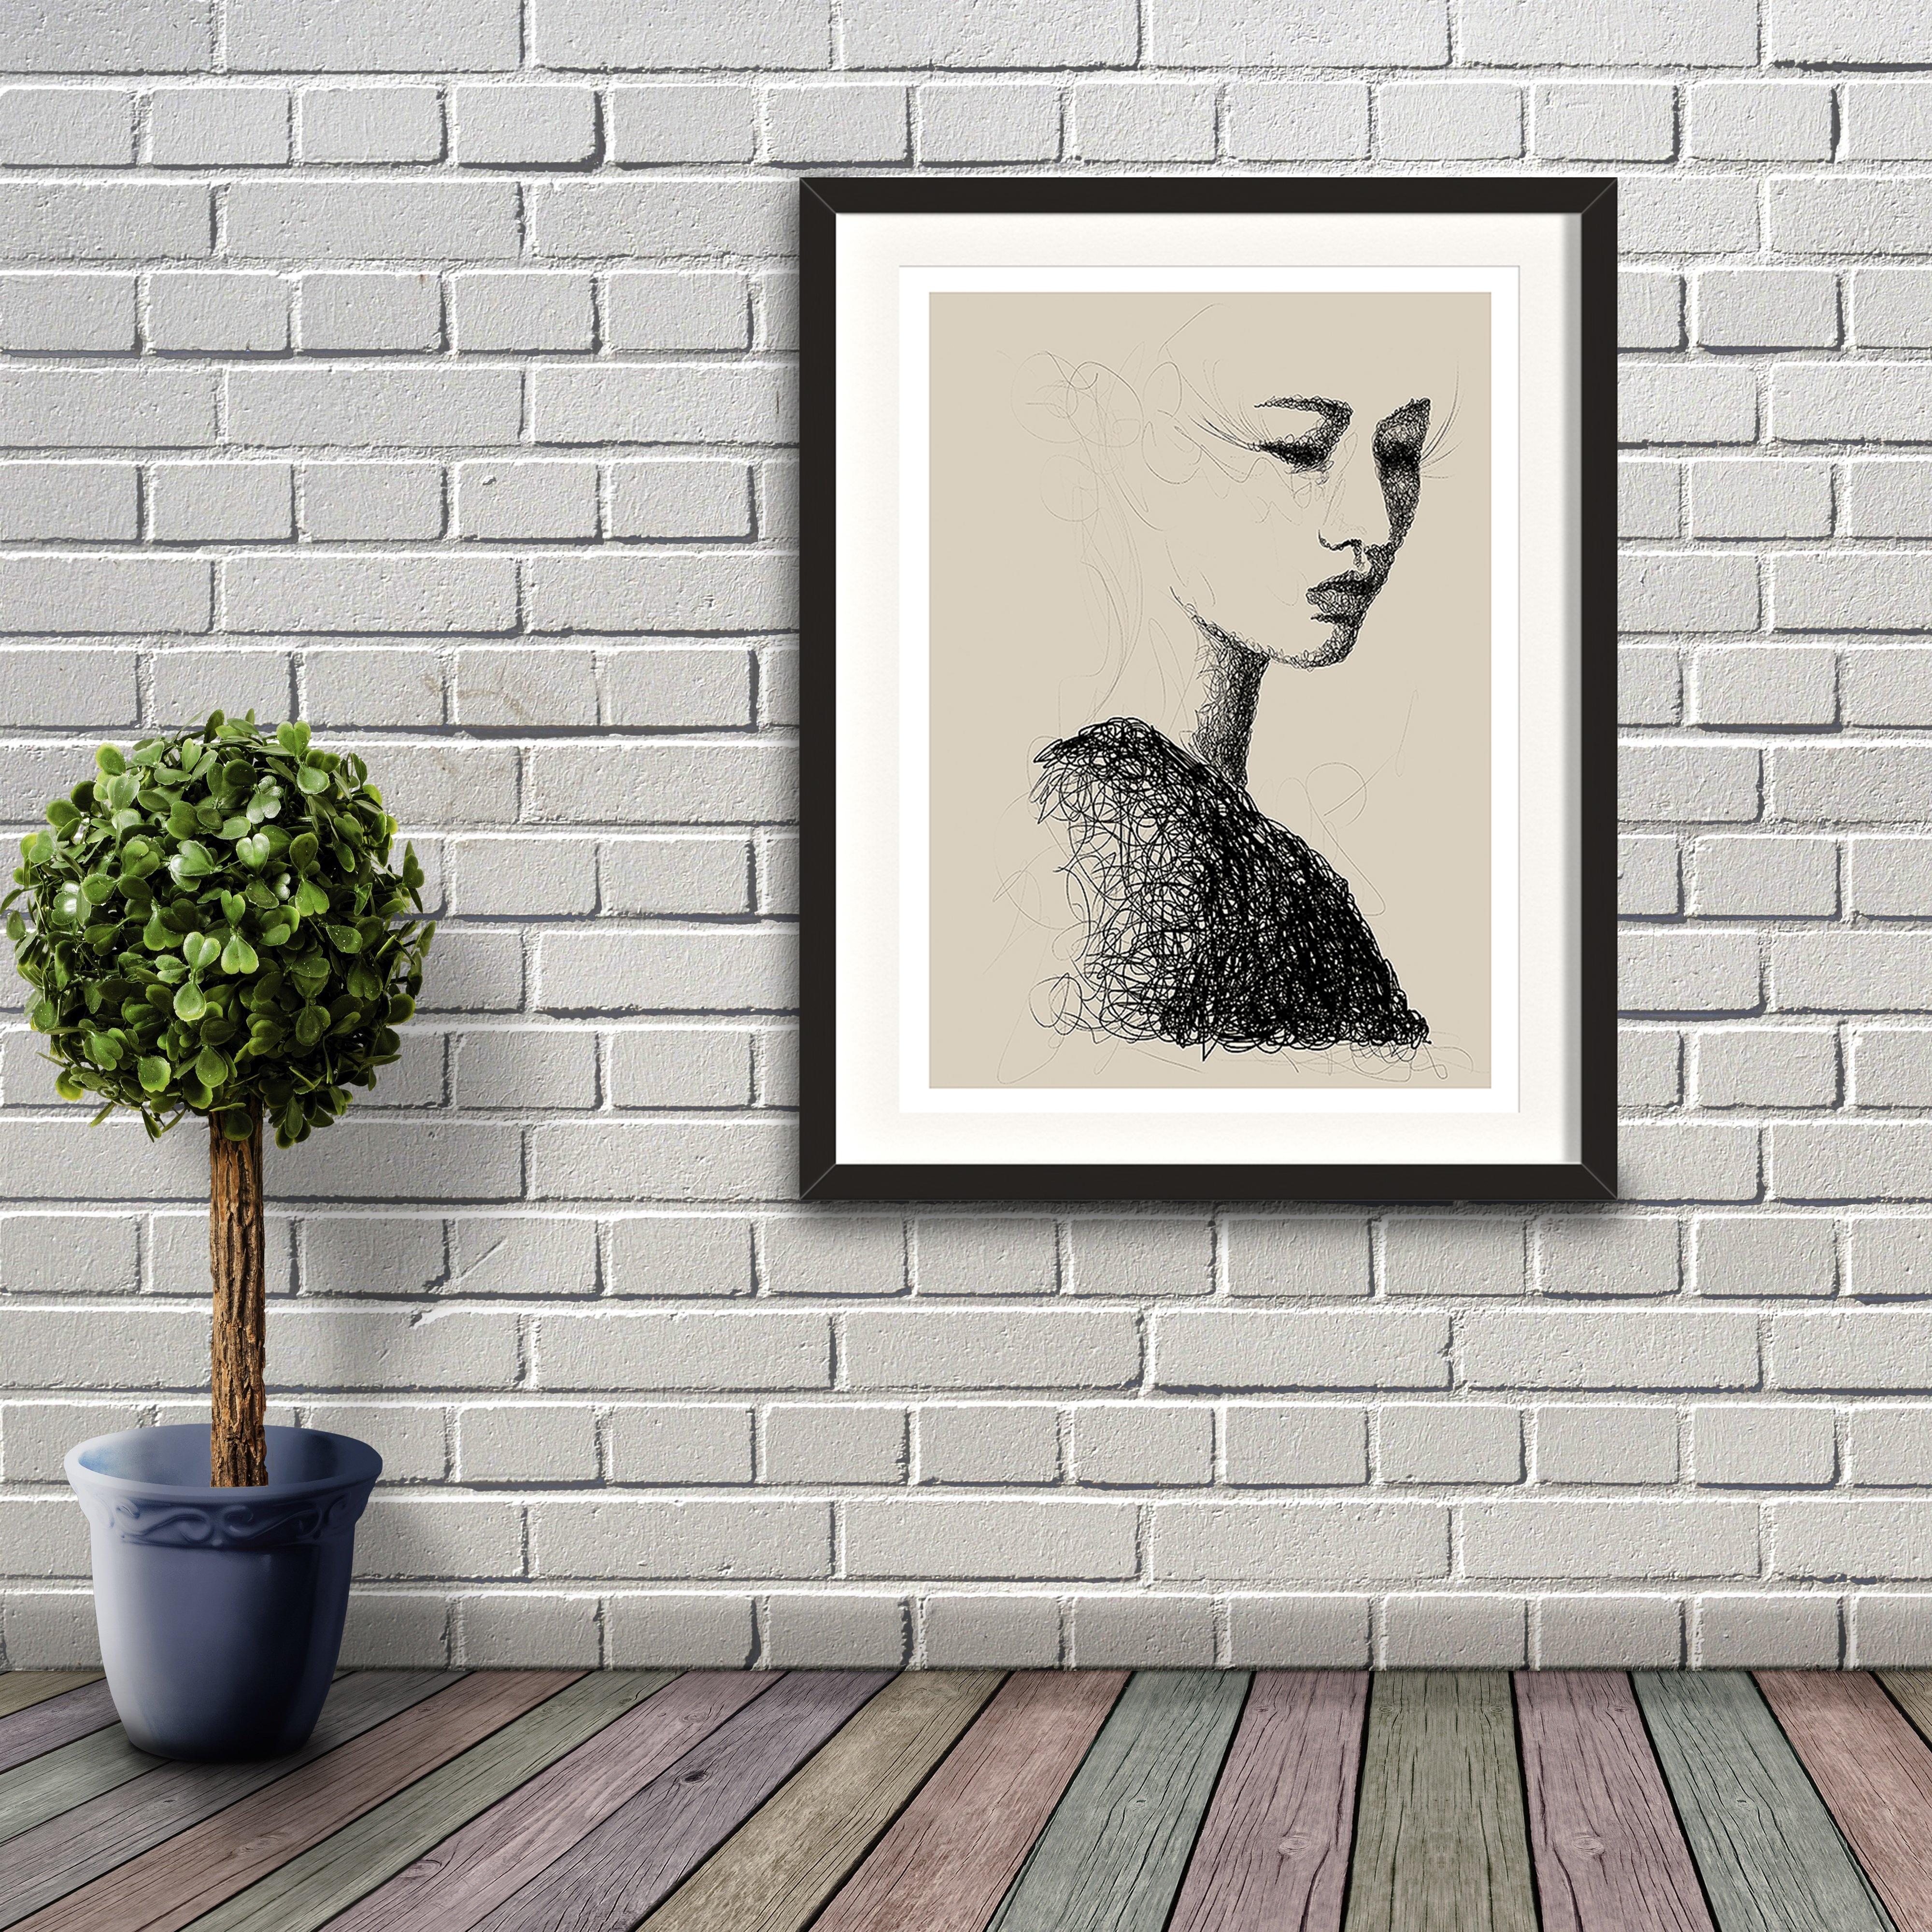 A digital painting called Line Study 1.0 by Lily Bourne showing a delicate female head contructed a swirling black line on a neutral background. Artwork shown in a black frame hanging on a brick wall.